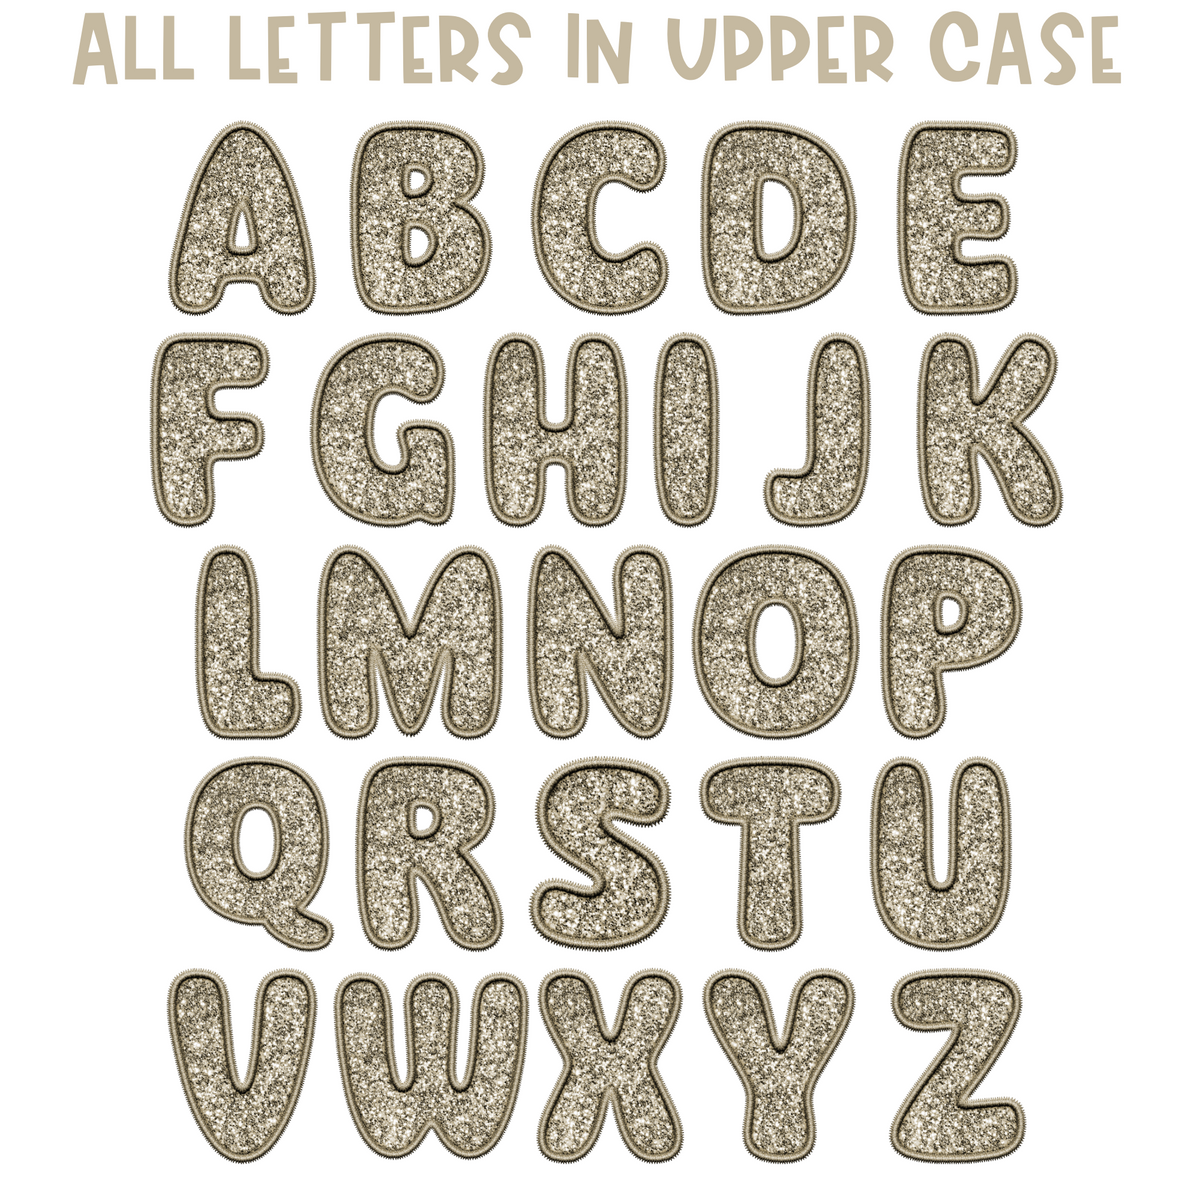 Gold Embroidery Glitter Alphabet Set | PNG files Alphabet Letters, Digital Art, PNG Only